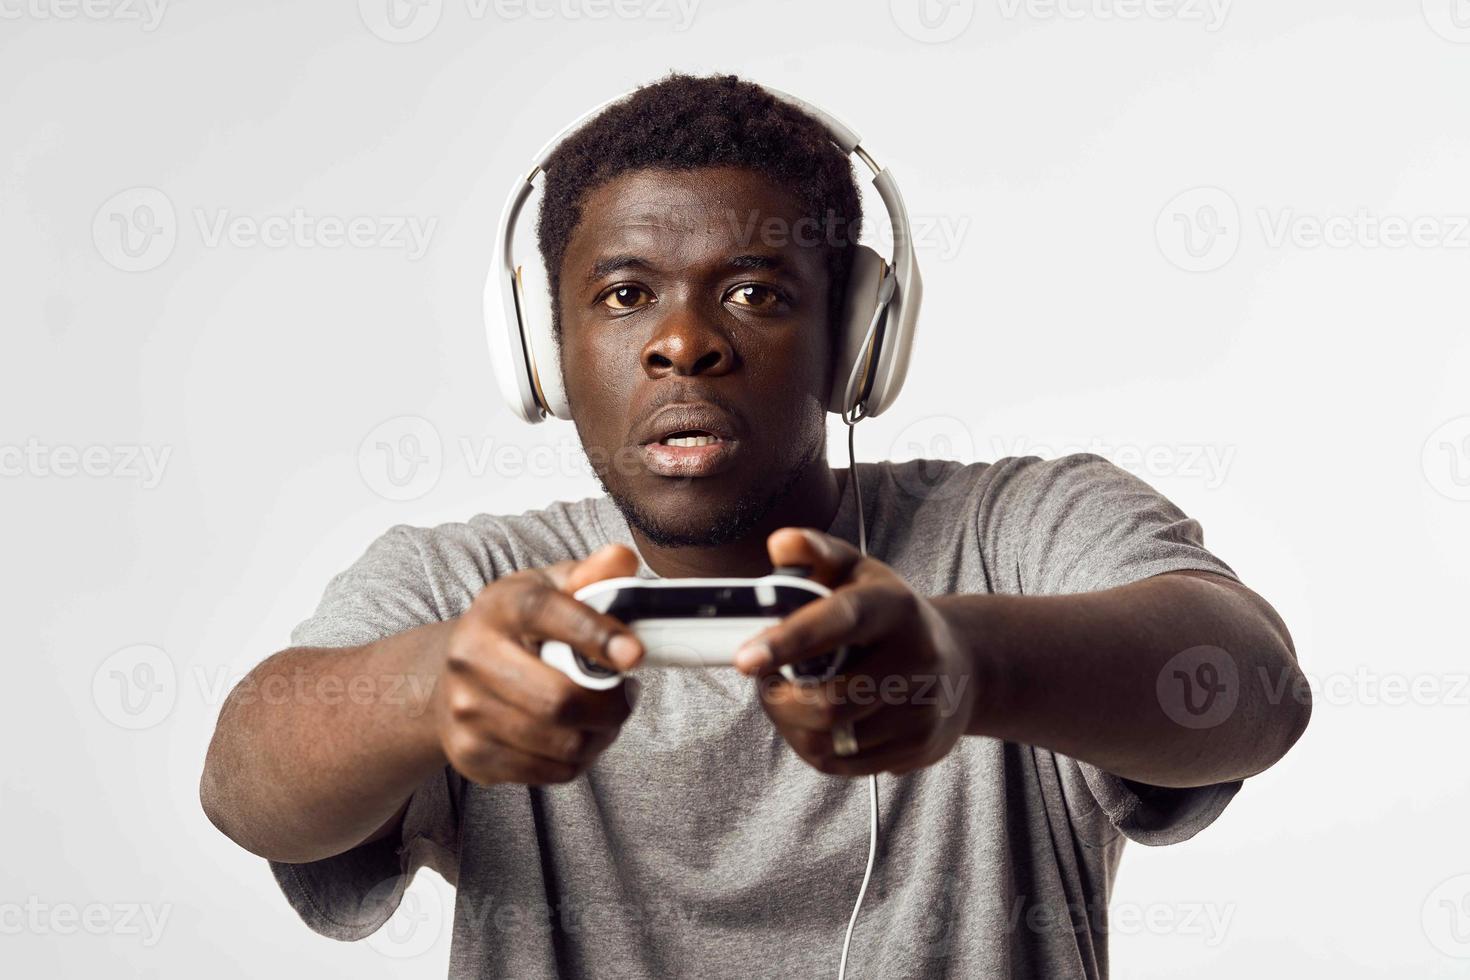 a man of african appearance in headphones with a gamepad in his hands plays video games technology photo